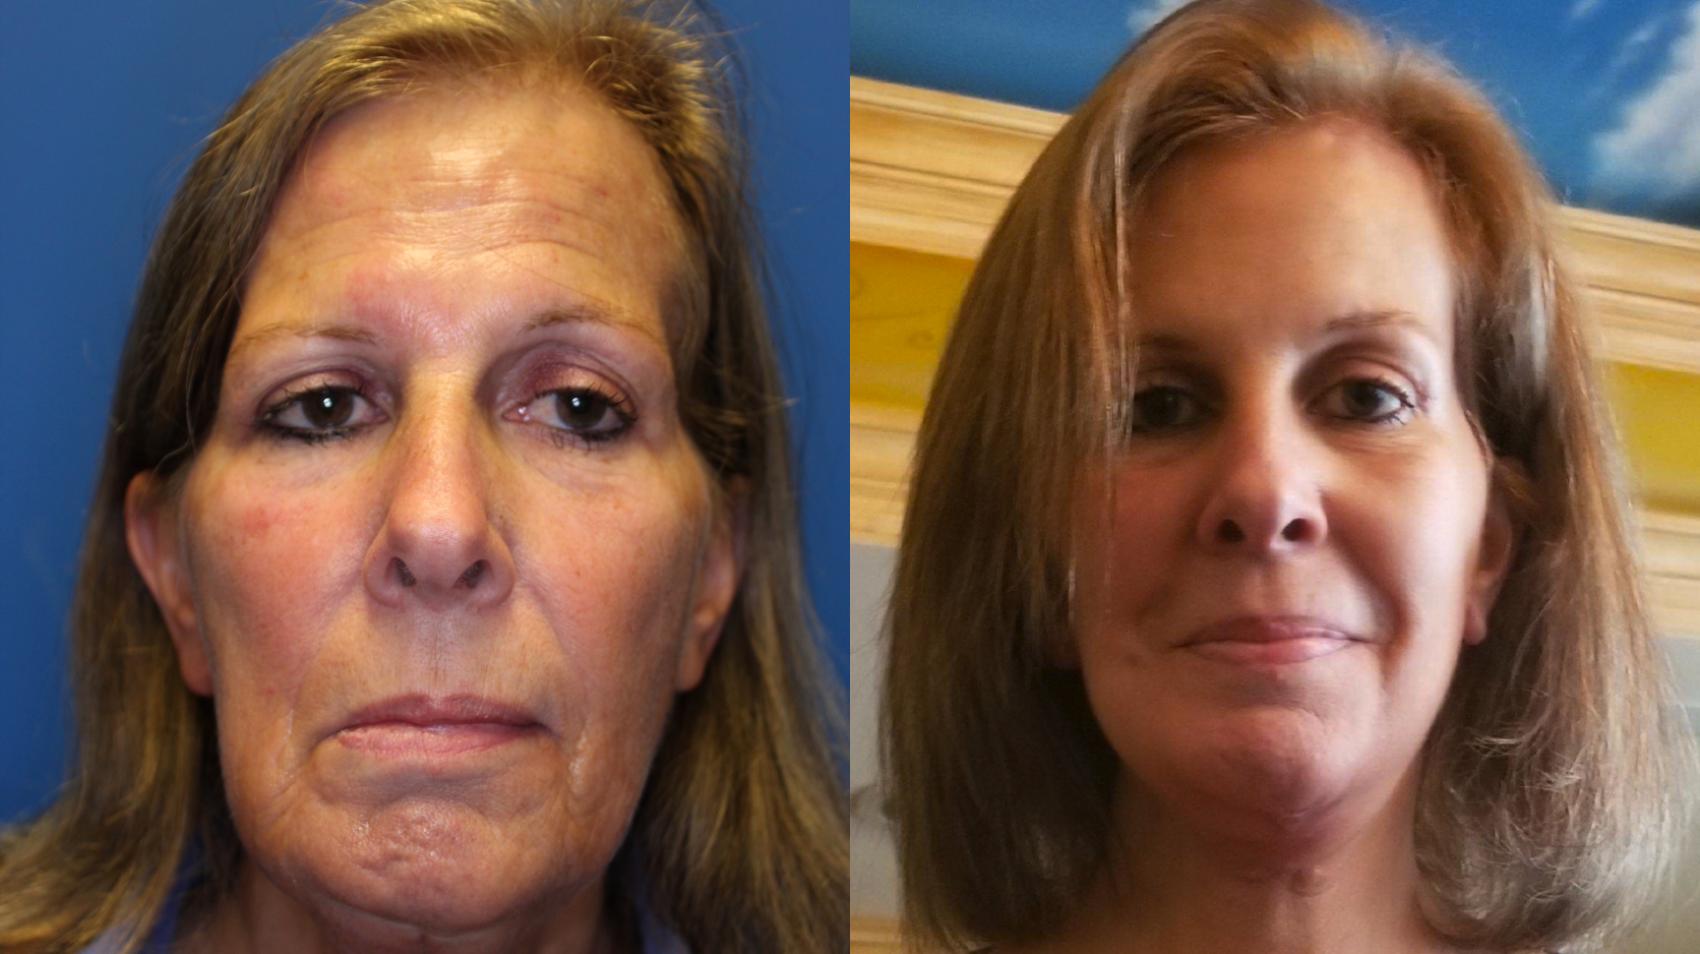 Facelift Before & After Photo | San Francisco, CA | Kaiser Permanente Cosmetic Services